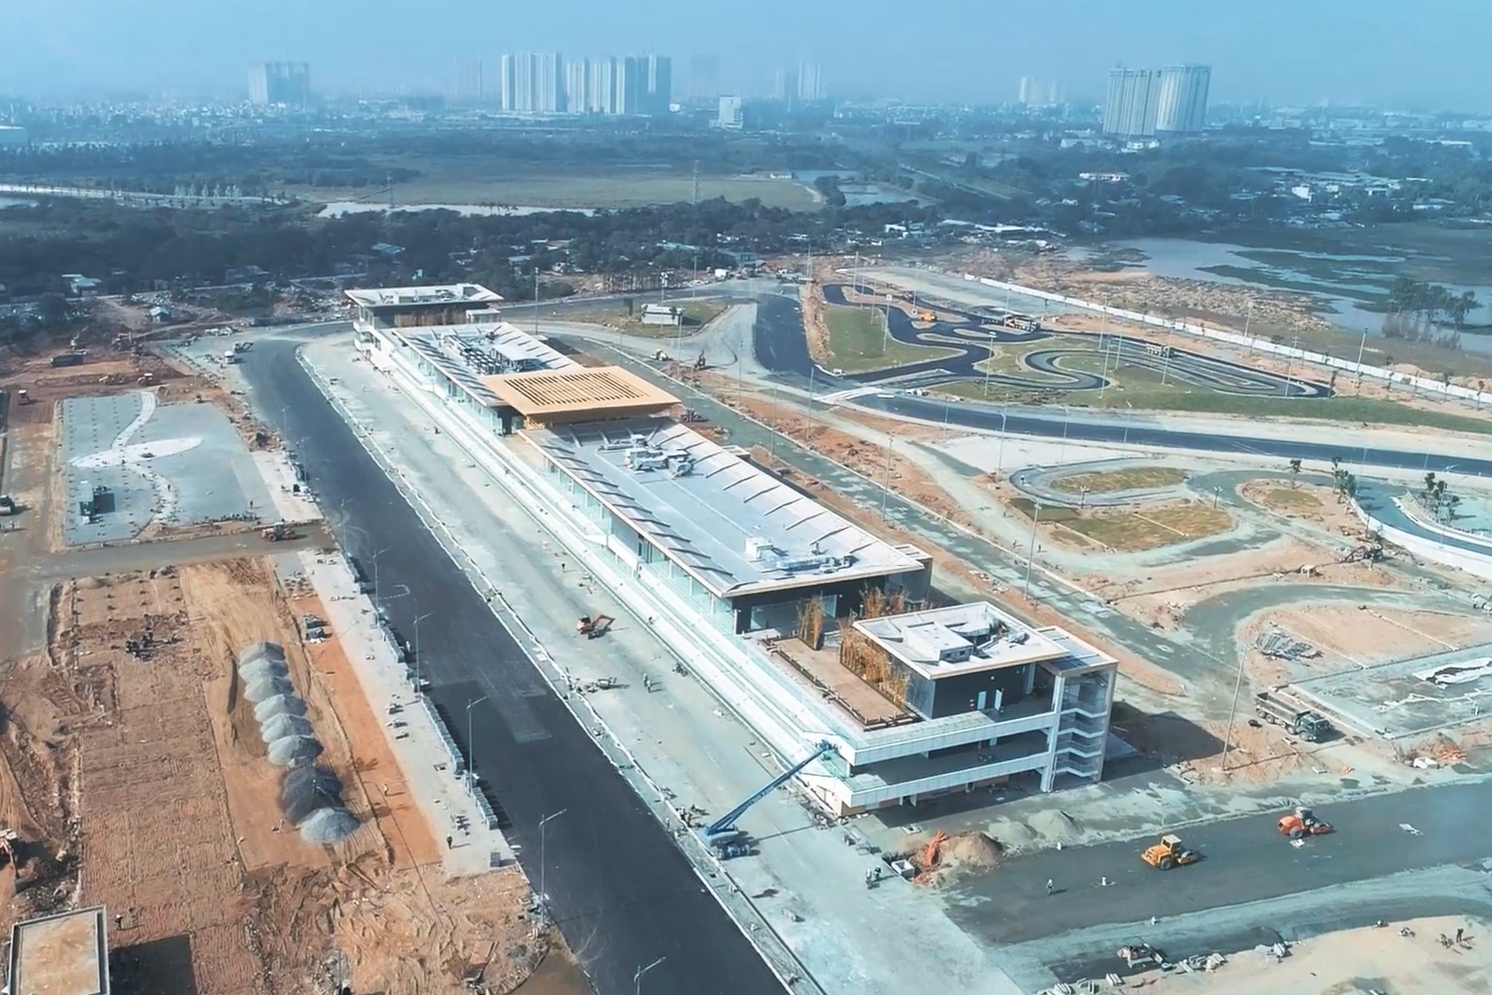 The Hanoi F1 Circuit in Vietnam being constructed in January 2020. Hosting a F1 race in Hanoi would have not only been a major victory for the country and GMS region, but also the region's tourism industry and overall ecomomy. Click to enlarge.